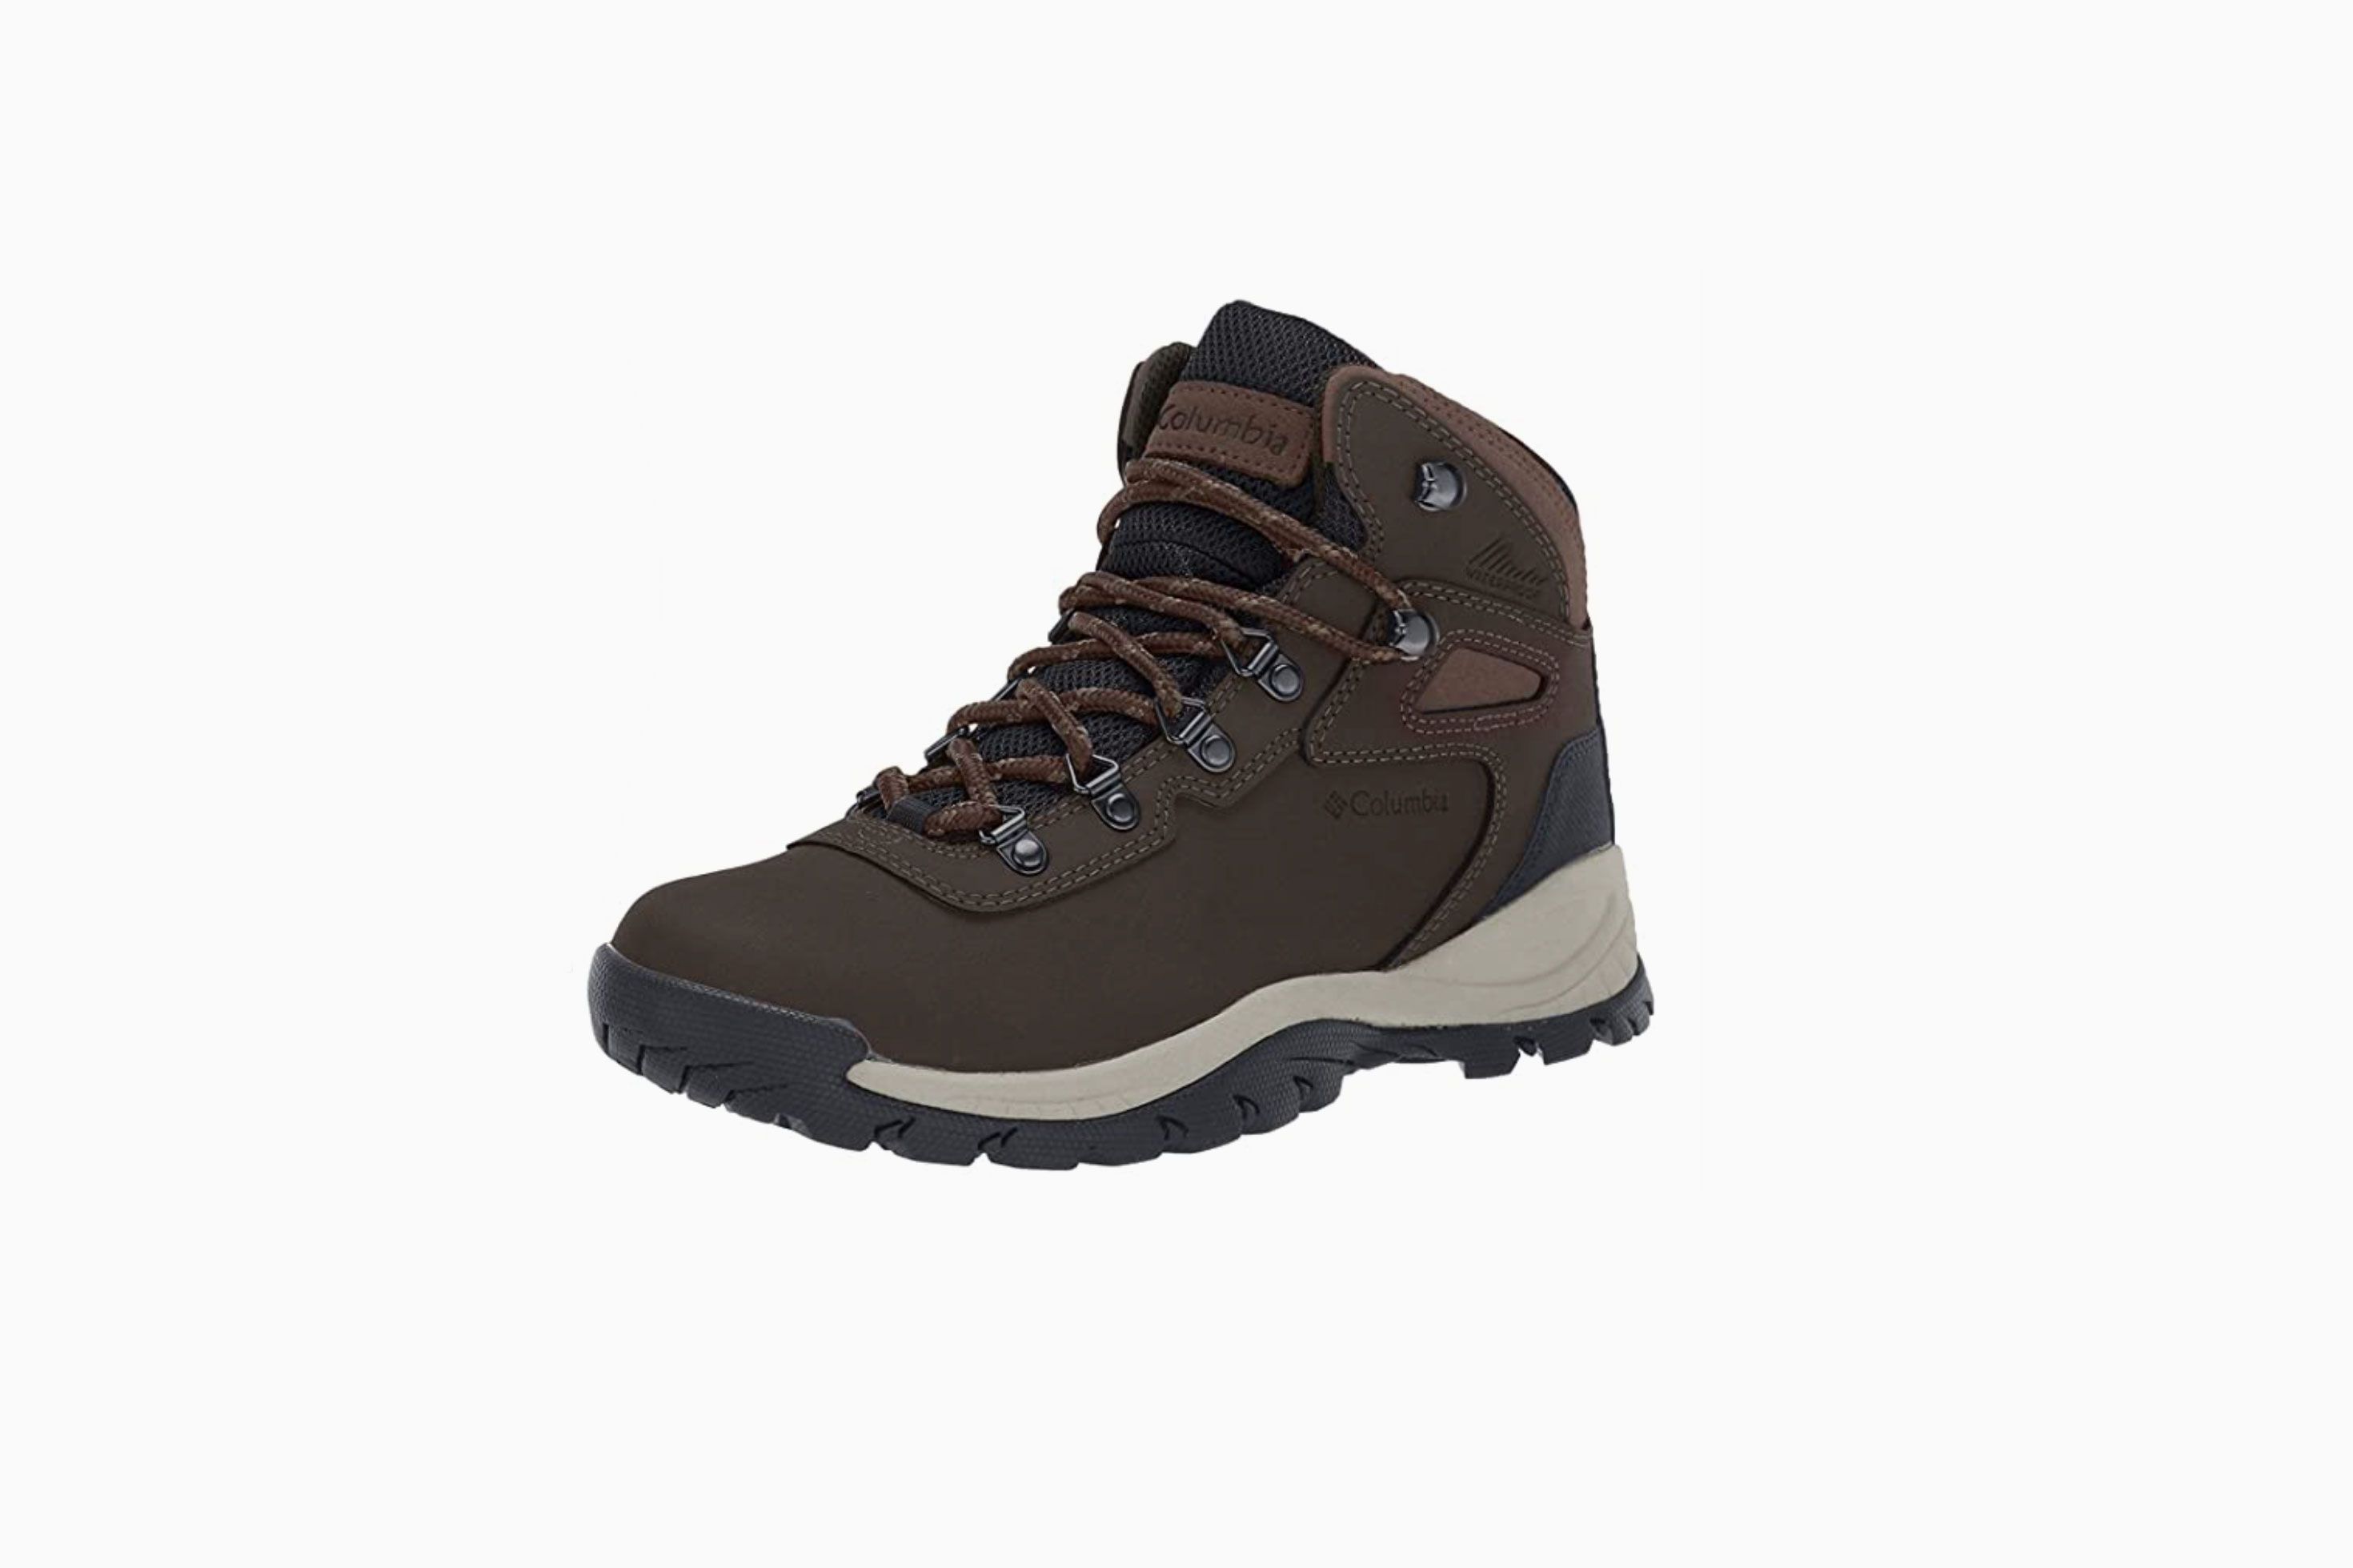 Ladies Combat Work Boots Cestfini Waterproof Hiking Boots Women Best Choice for Walking and Casual